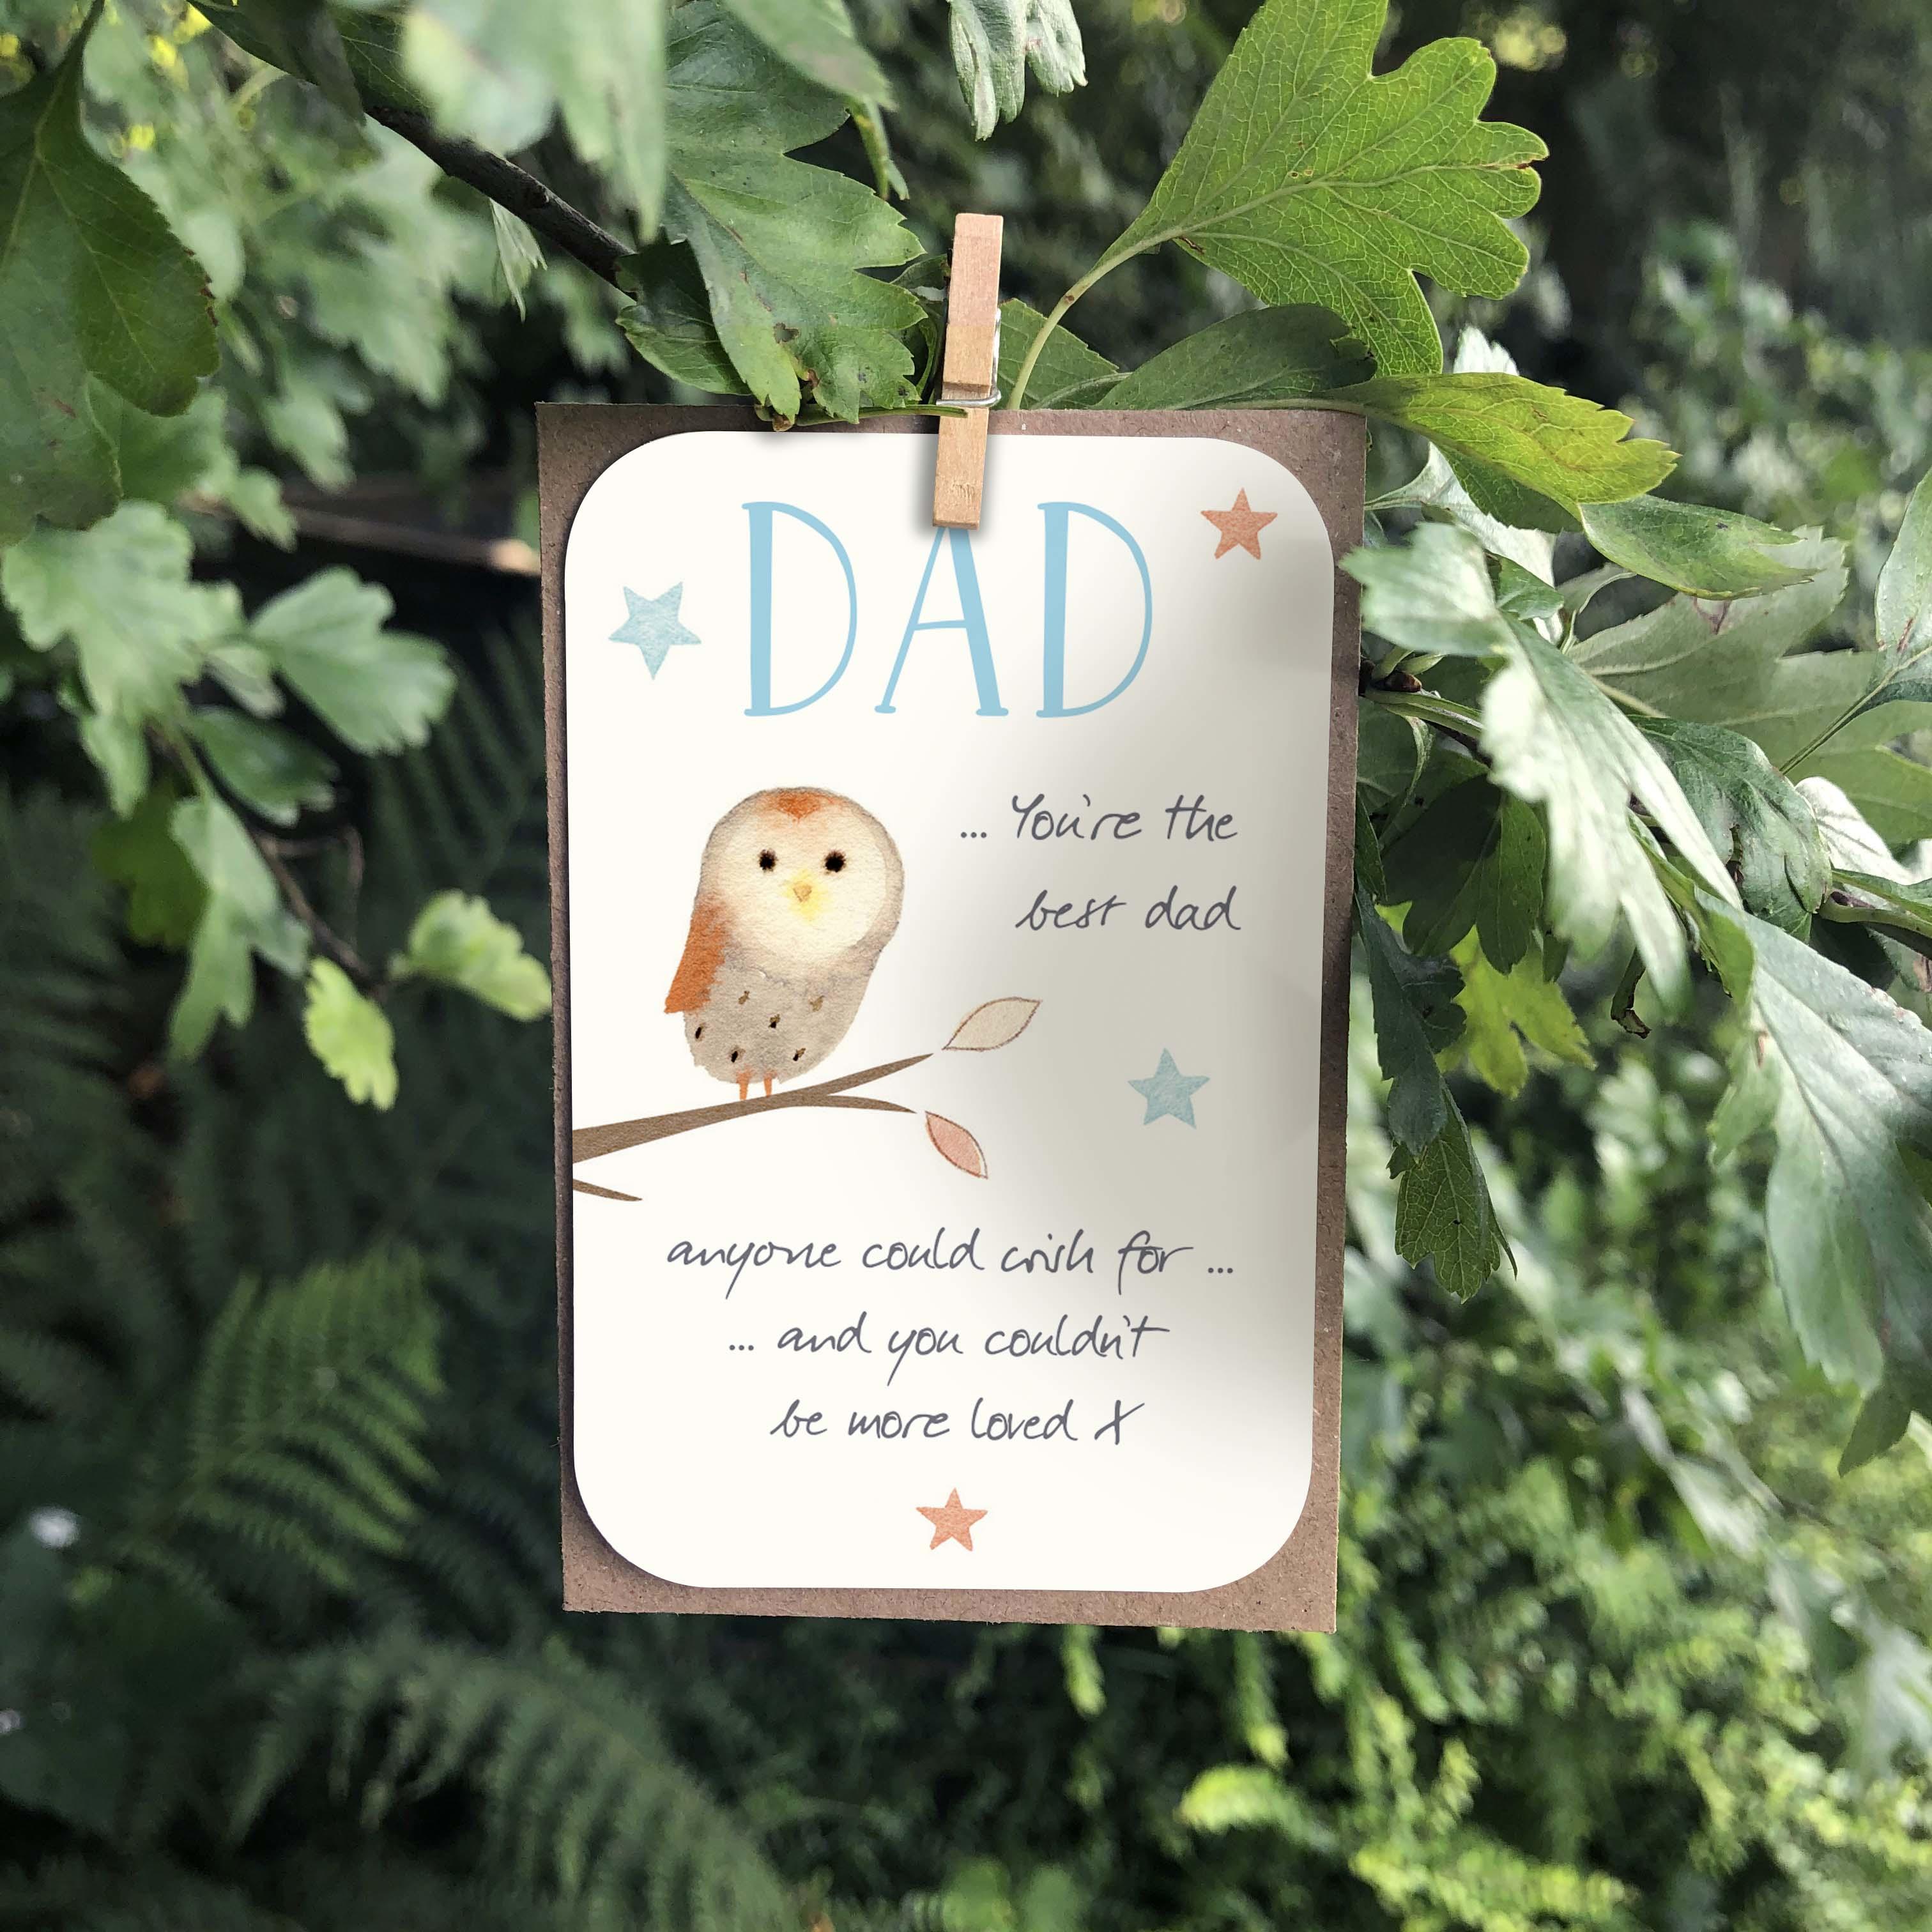 A small keepsake card with a “Dad” caption and a “You’re the best dad” message. Features a cute owl sitting in a tree illustration.